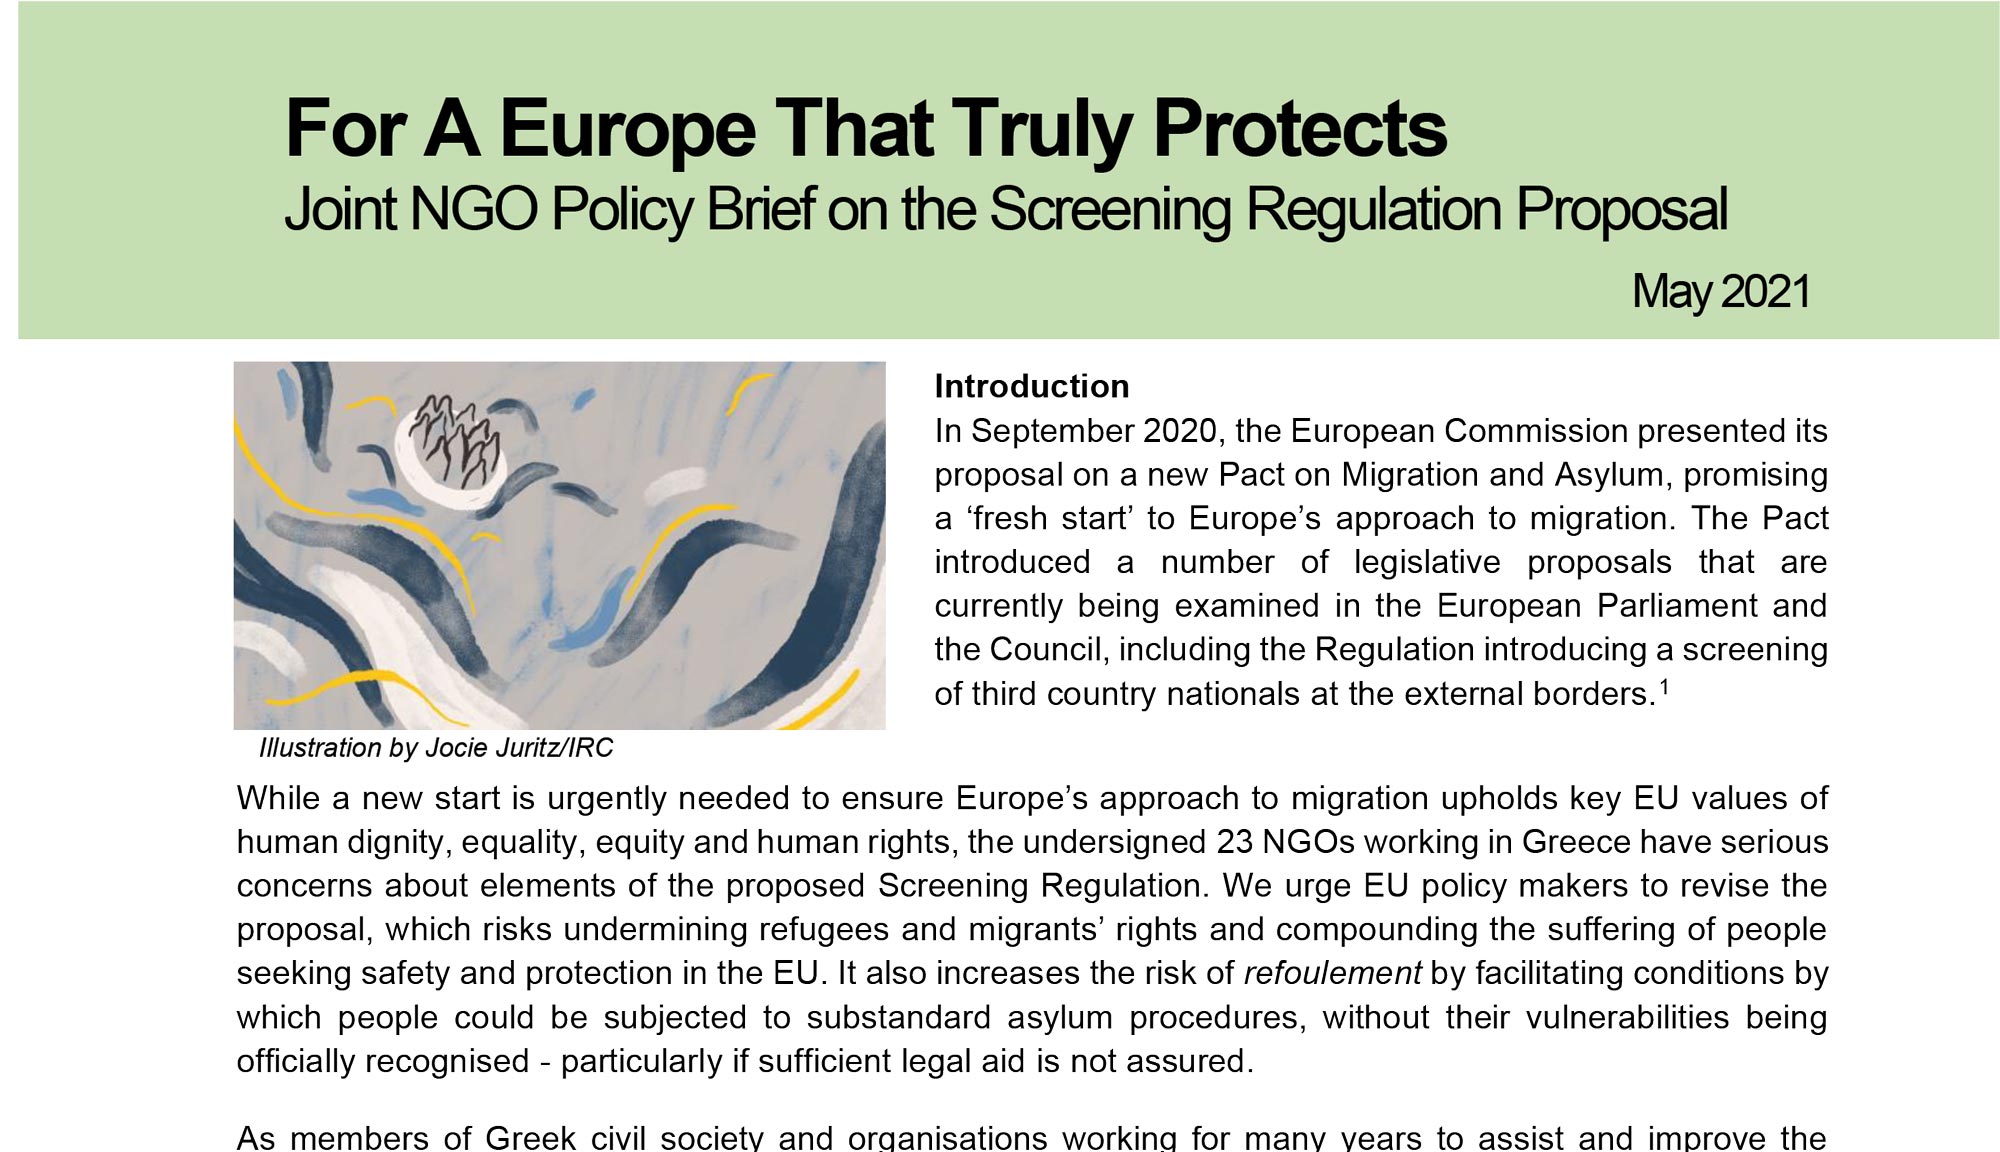 Joint NGO Policy Brief on the Screening Regulation Proposal